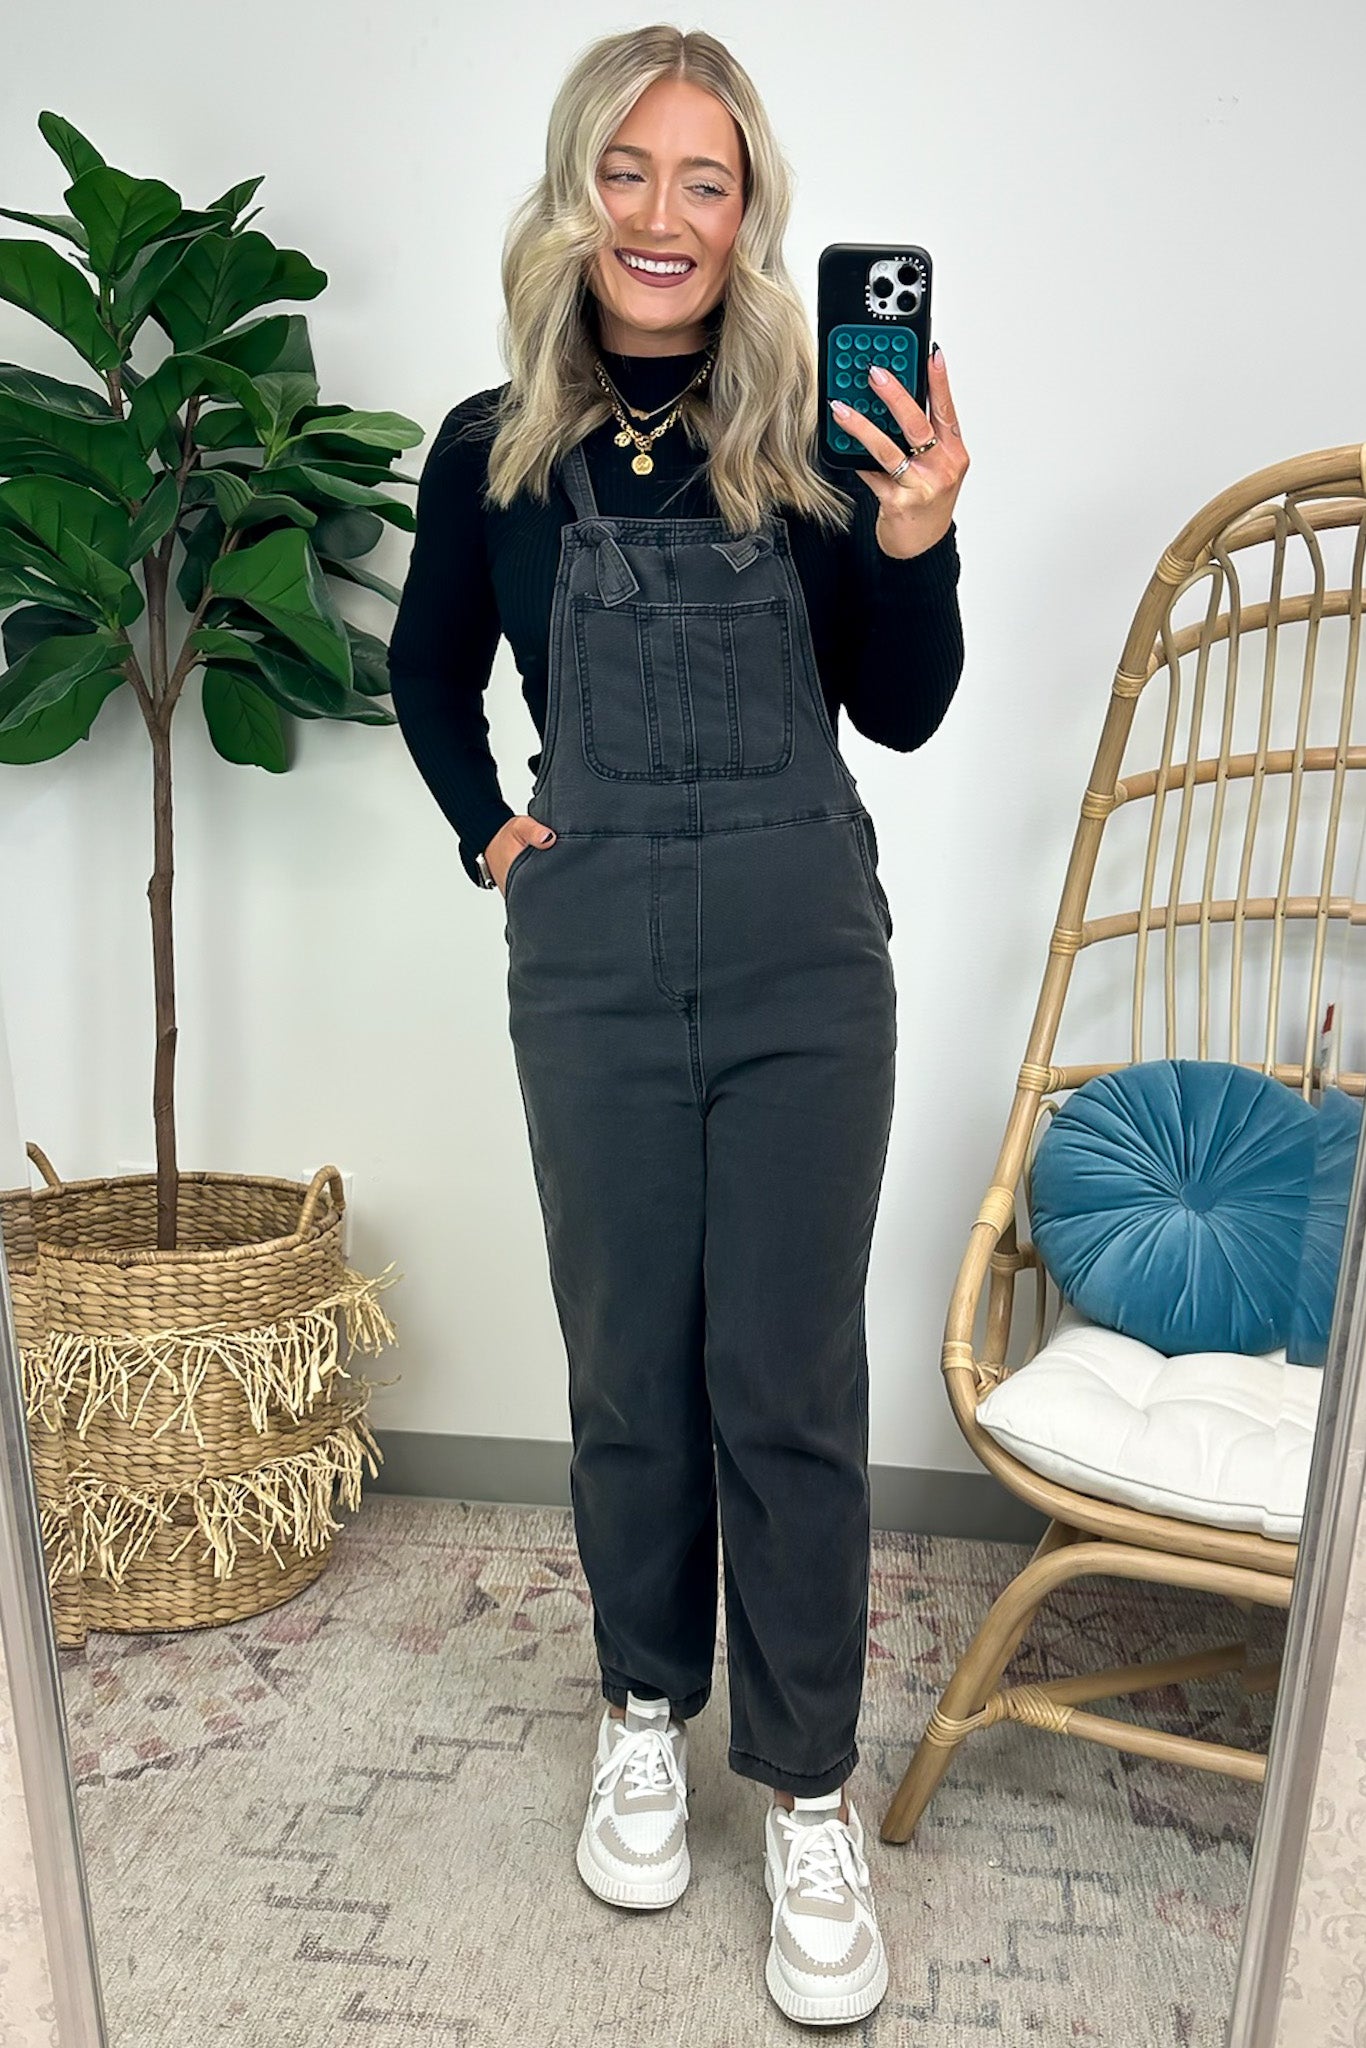  Kirsty Mineral Washed Knot Strap Overalls - FINAL SALE - Madison and Mallory